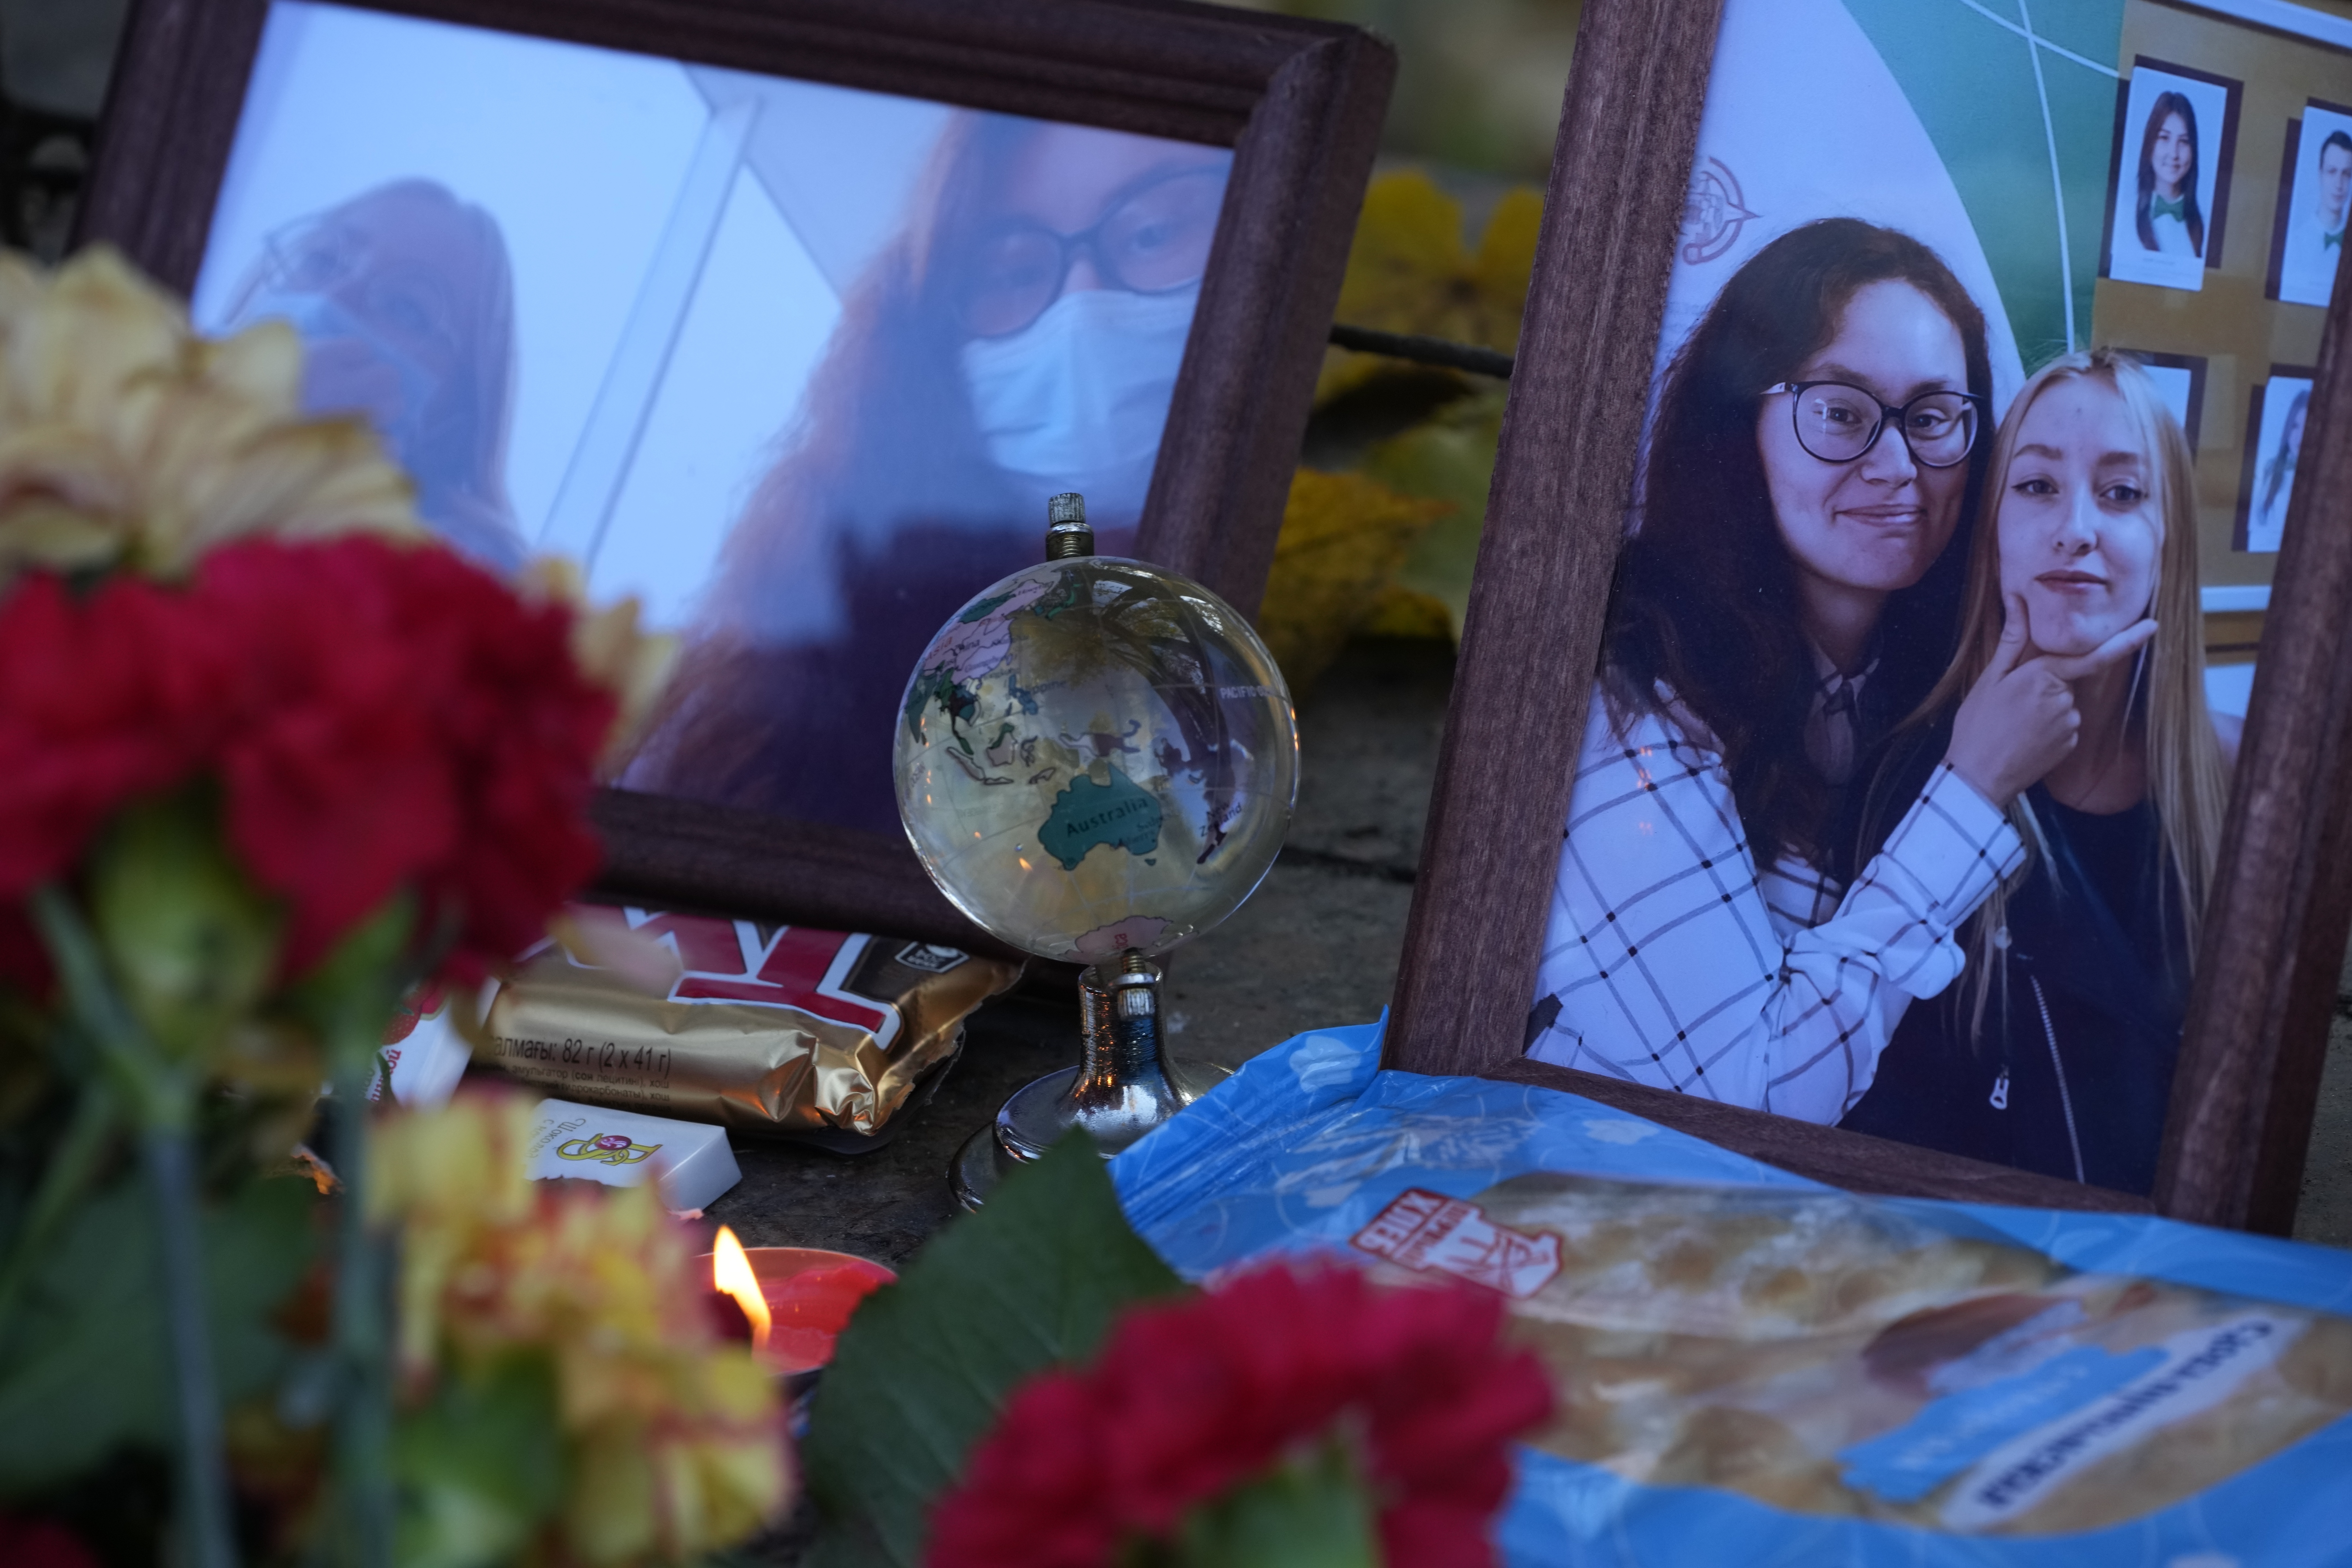 A candle, flowers and portraits of victims of the shooting are displayed on a table outside the Perm State University following a campus shooting.